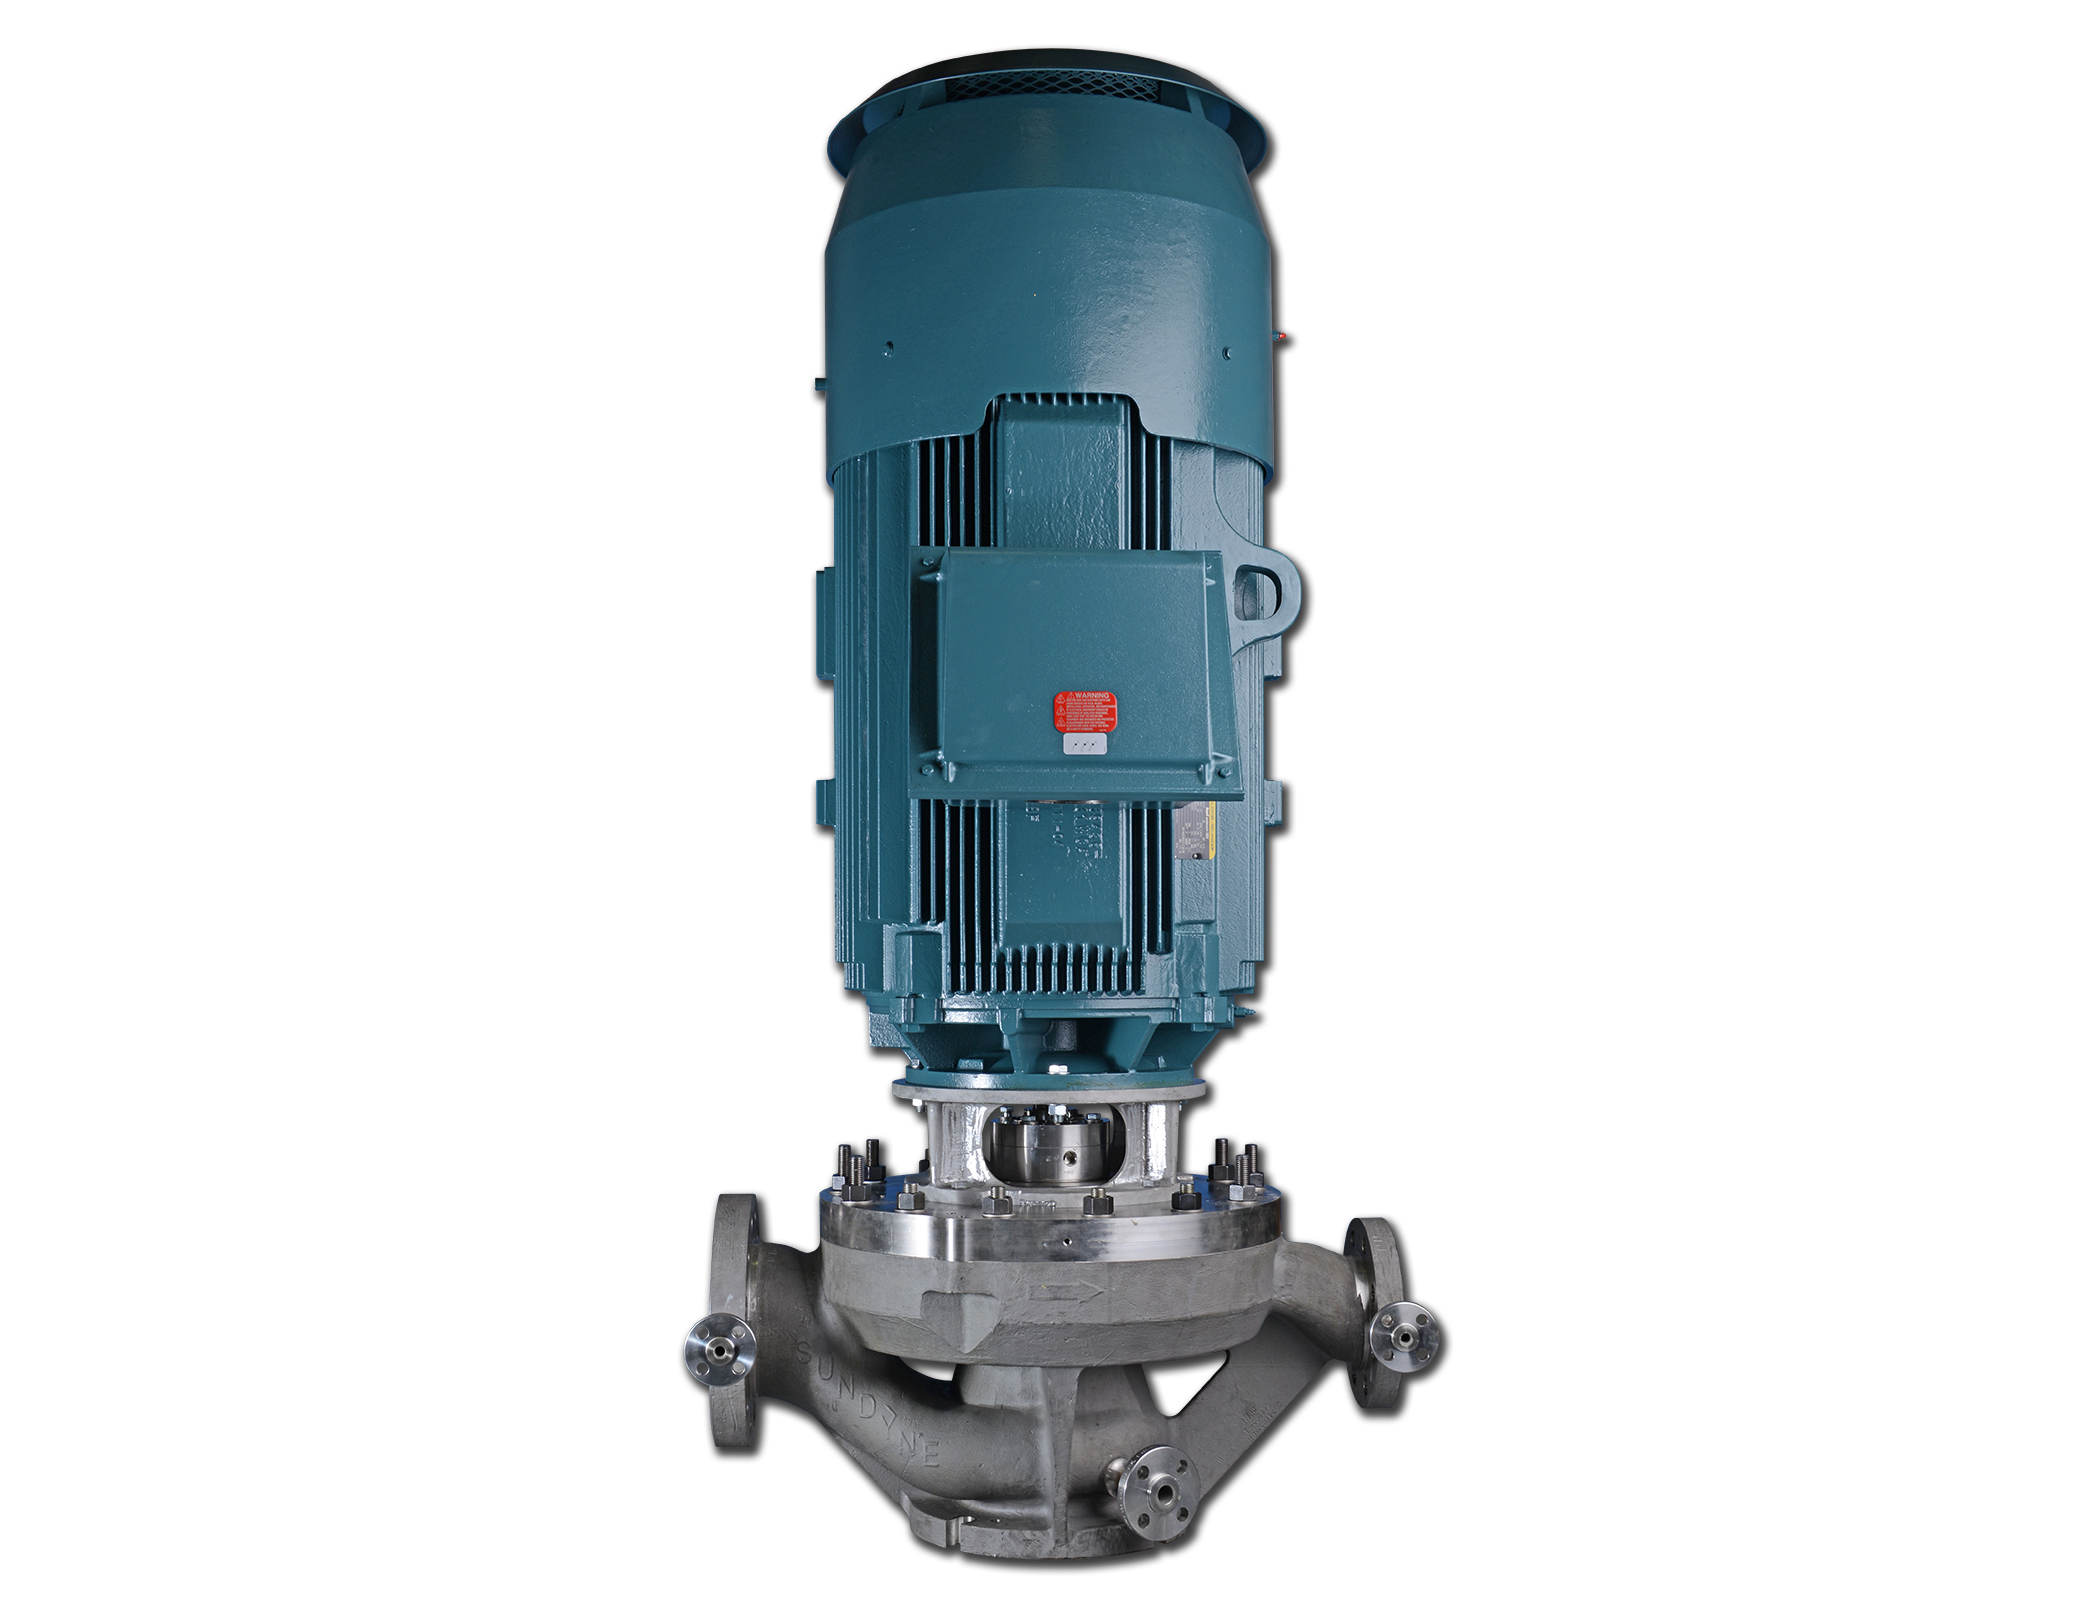 Sundyne has announced a series of improvements to its API-compliant LMV 803Lr.